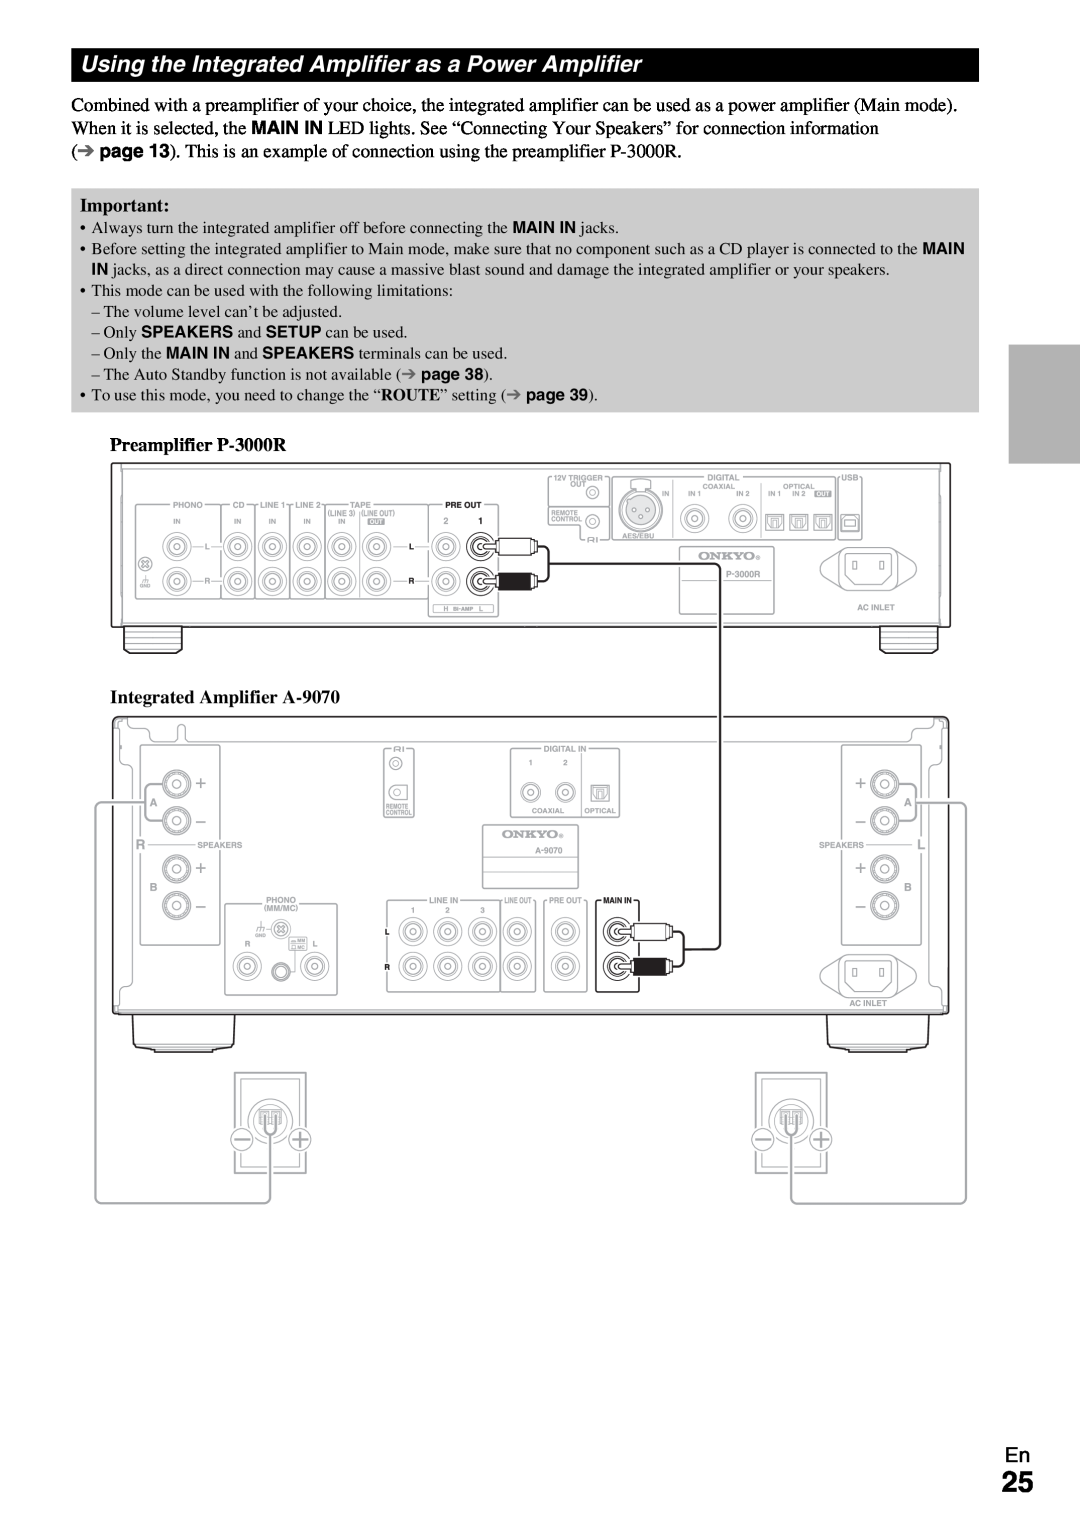 Onkyo instruction manual Preamplifier P-3000R Integrated Amplifier A-9070 